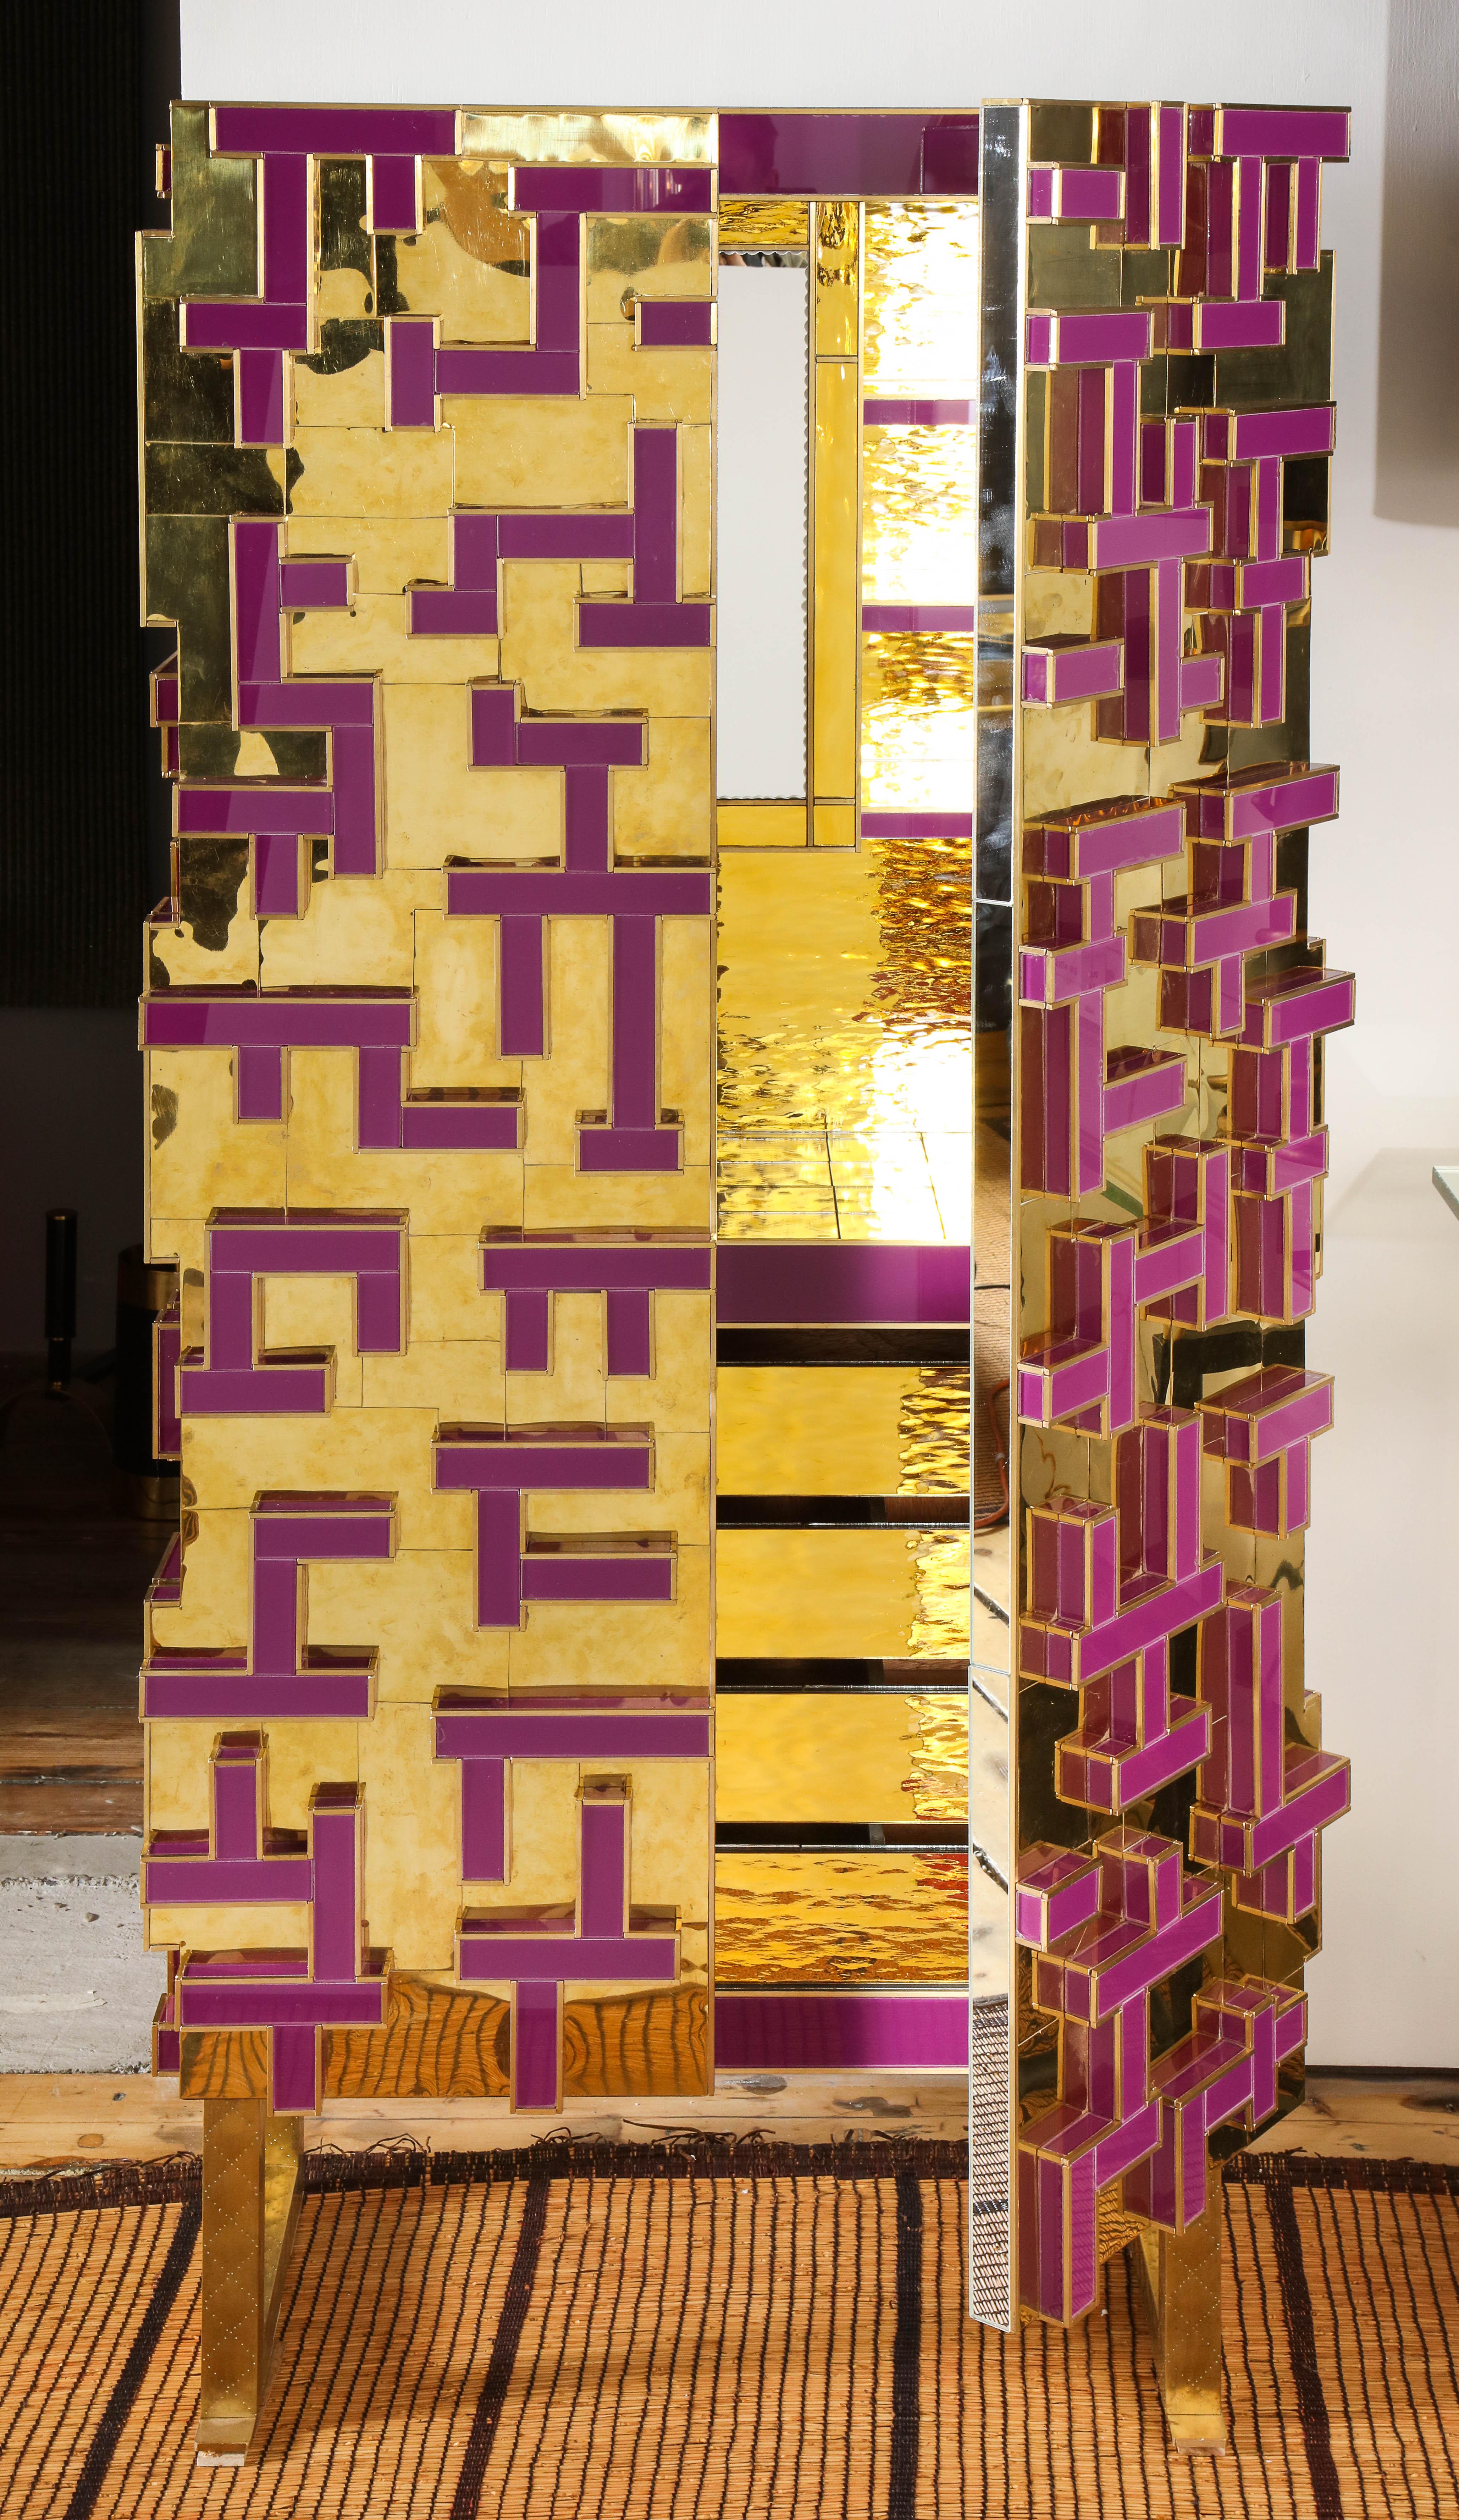 Brass and geometric purple/magenta art glass and clad cabinet. One-of-a-kind contemporary work that took over 1500 hours to handcraft. Entirely handmade by Studio Martin for Karina Gentinetta in Spain showing high quality and elegance of execution.